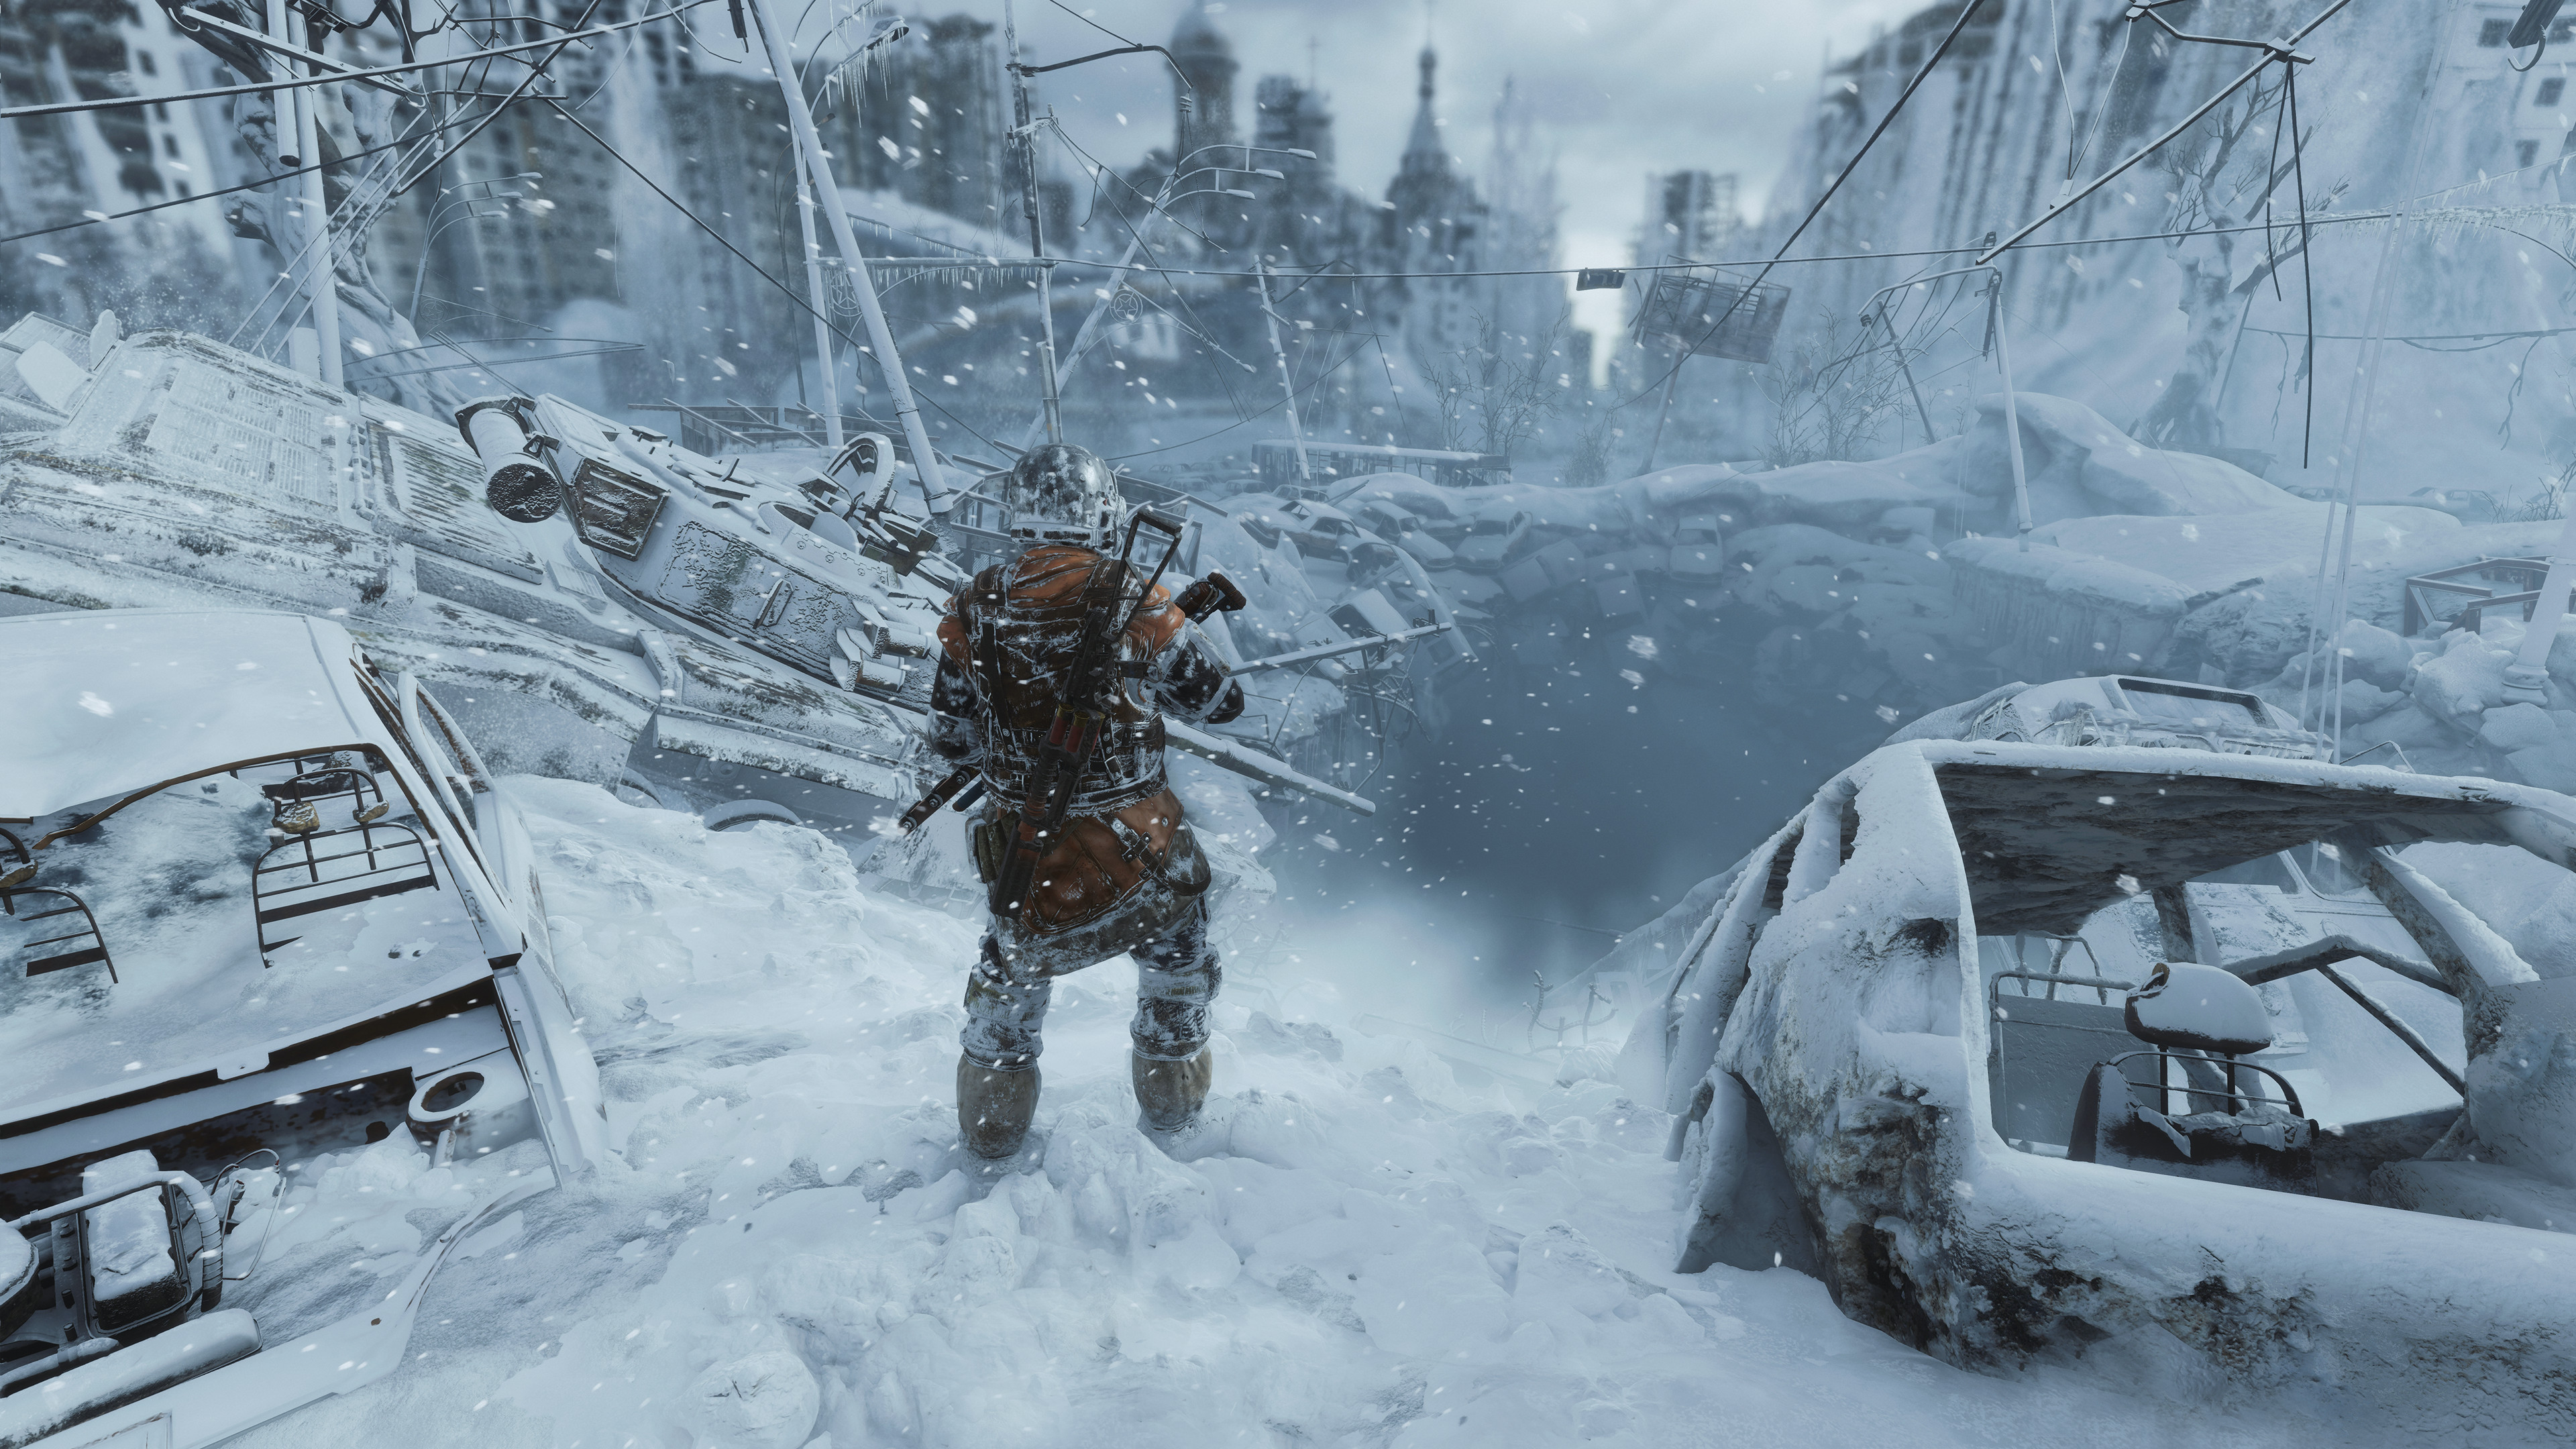 A soldier stands in a snow-covered city in a screenshot from Metro Exodus.